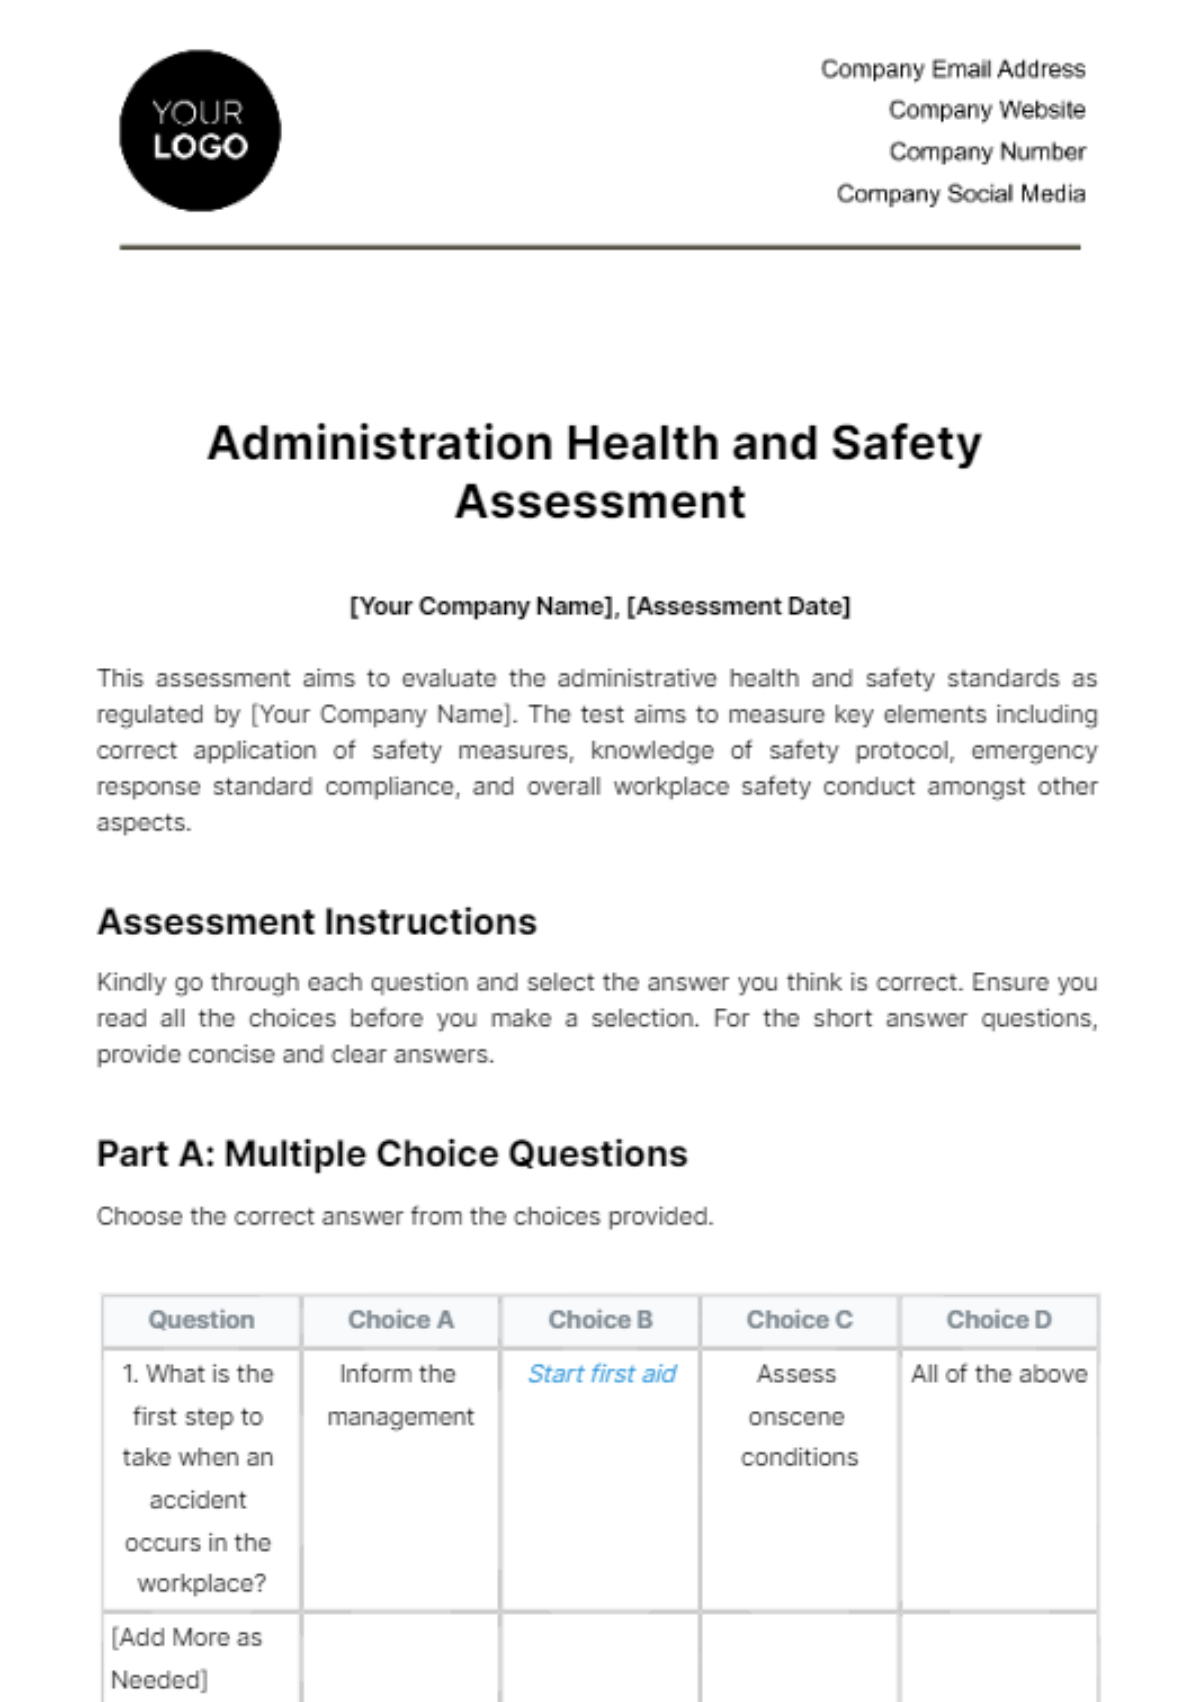 Free Administration Health and Safety Assessment Template